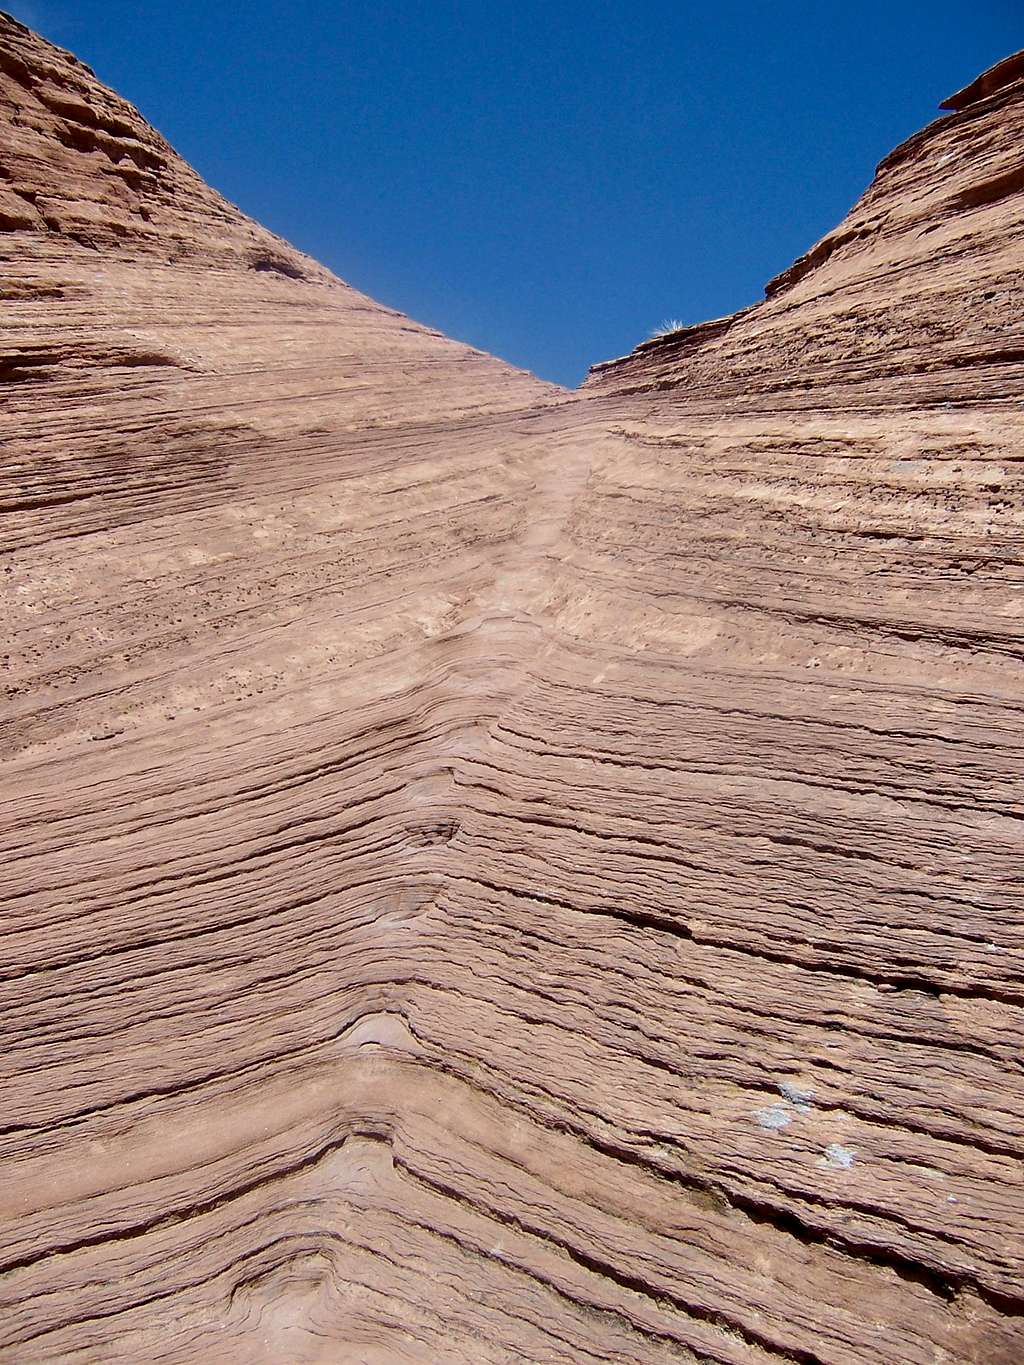 Stairway to Heaven, Bare Rock Trail, Canyon de Chelly